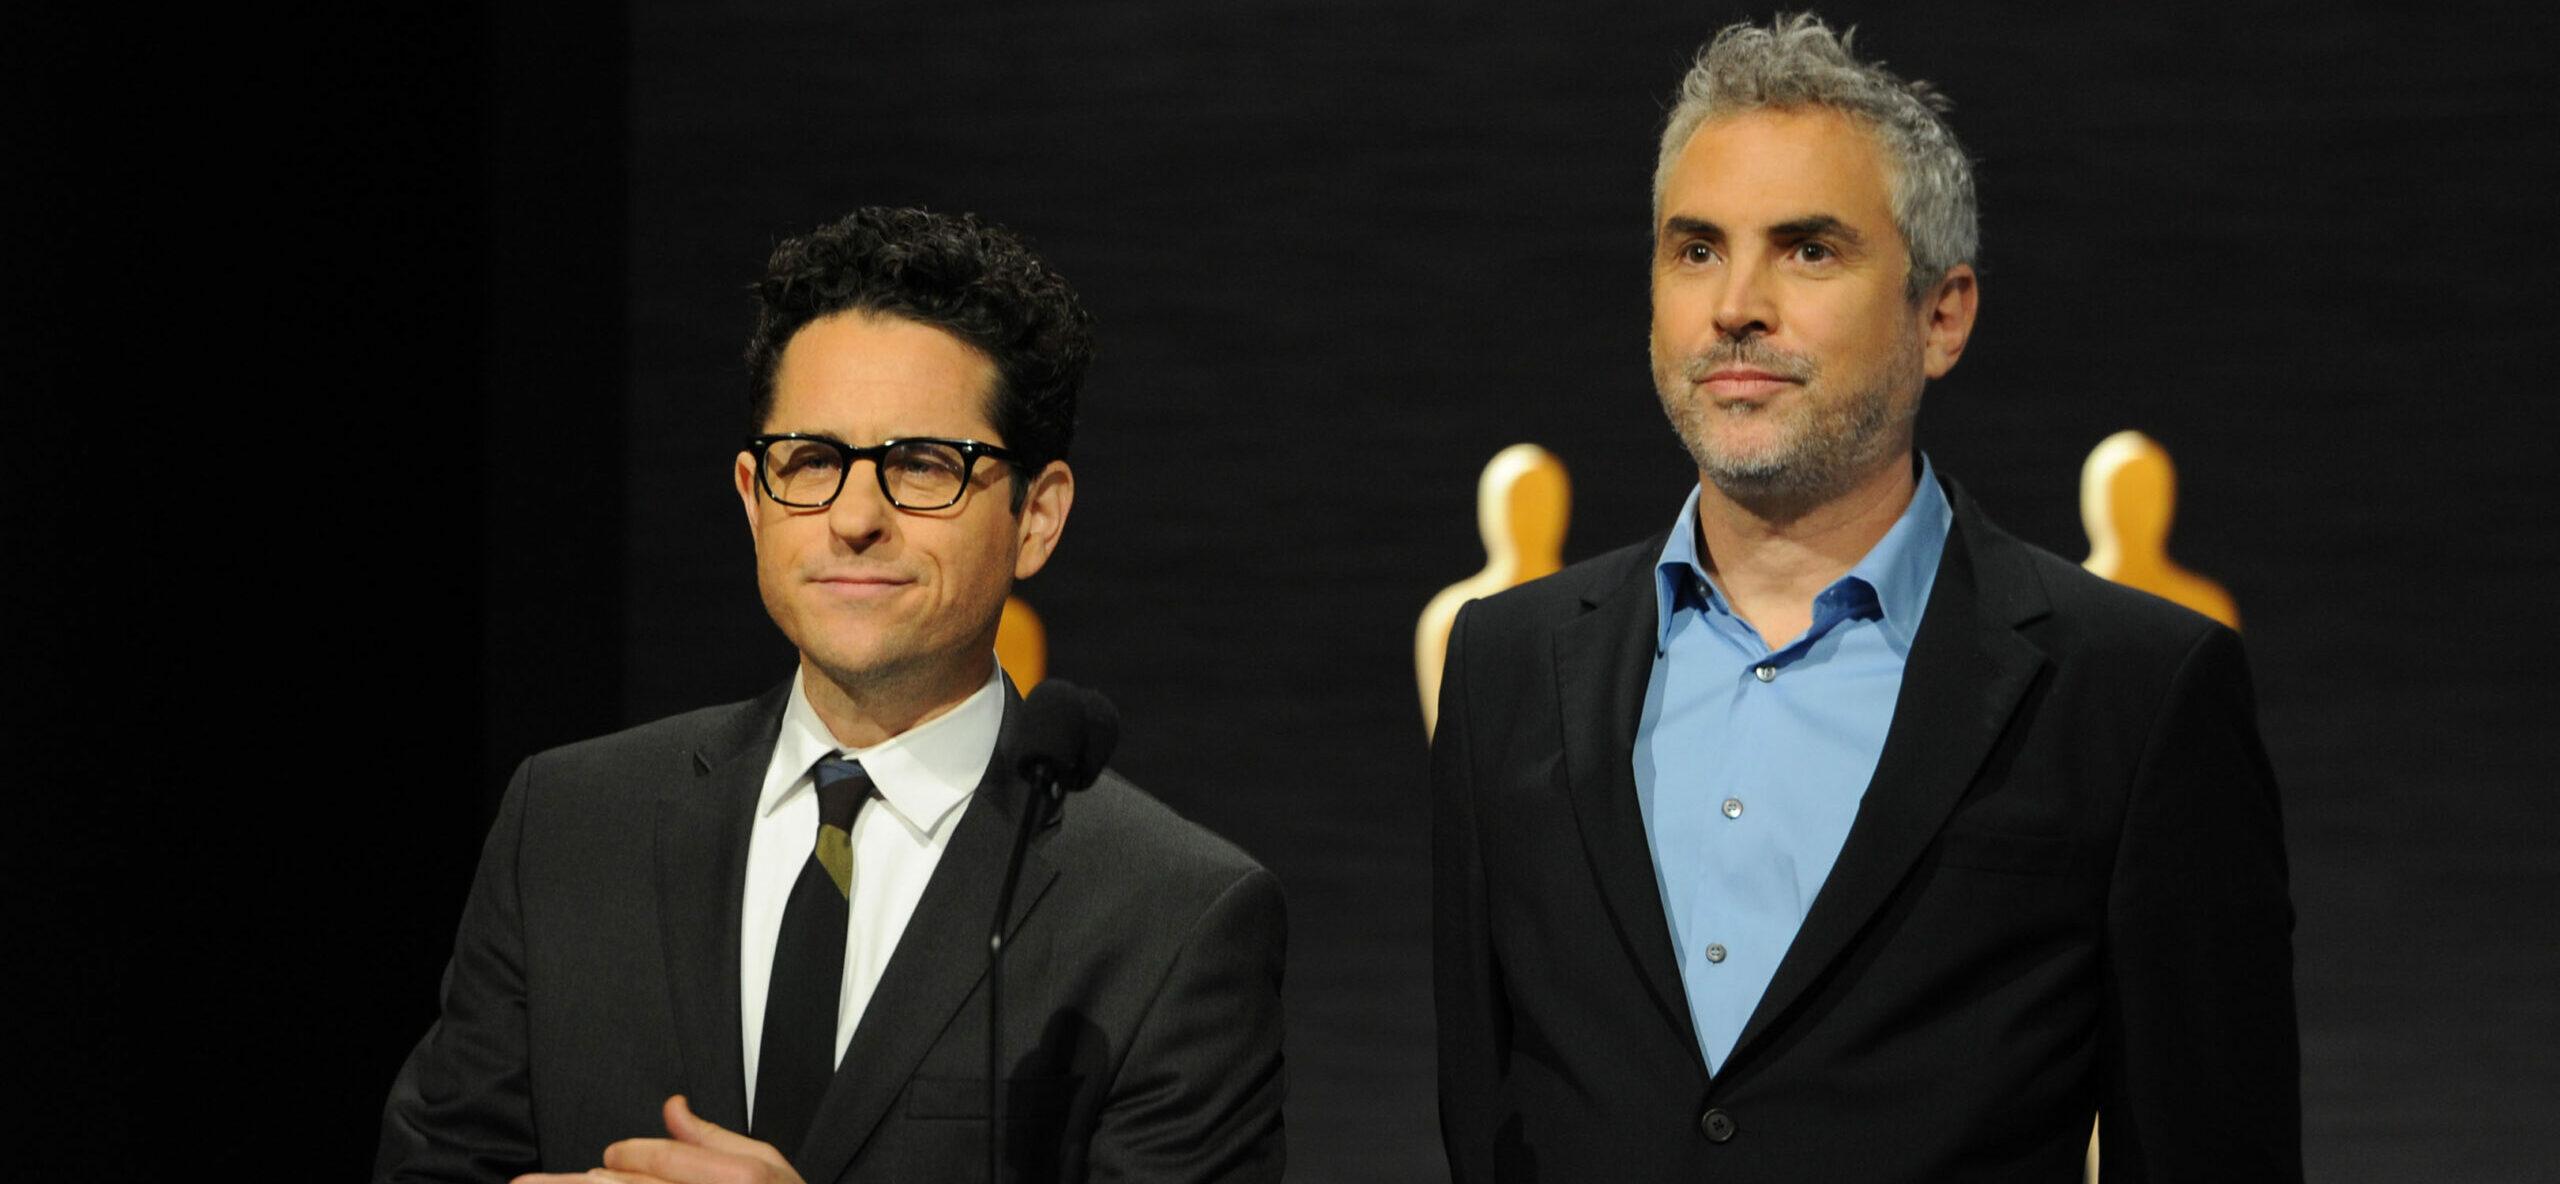 Cloverfield Producer JJ Abrams and Alfonso Cuaron present the Oscar nominations in Beverly Hills!